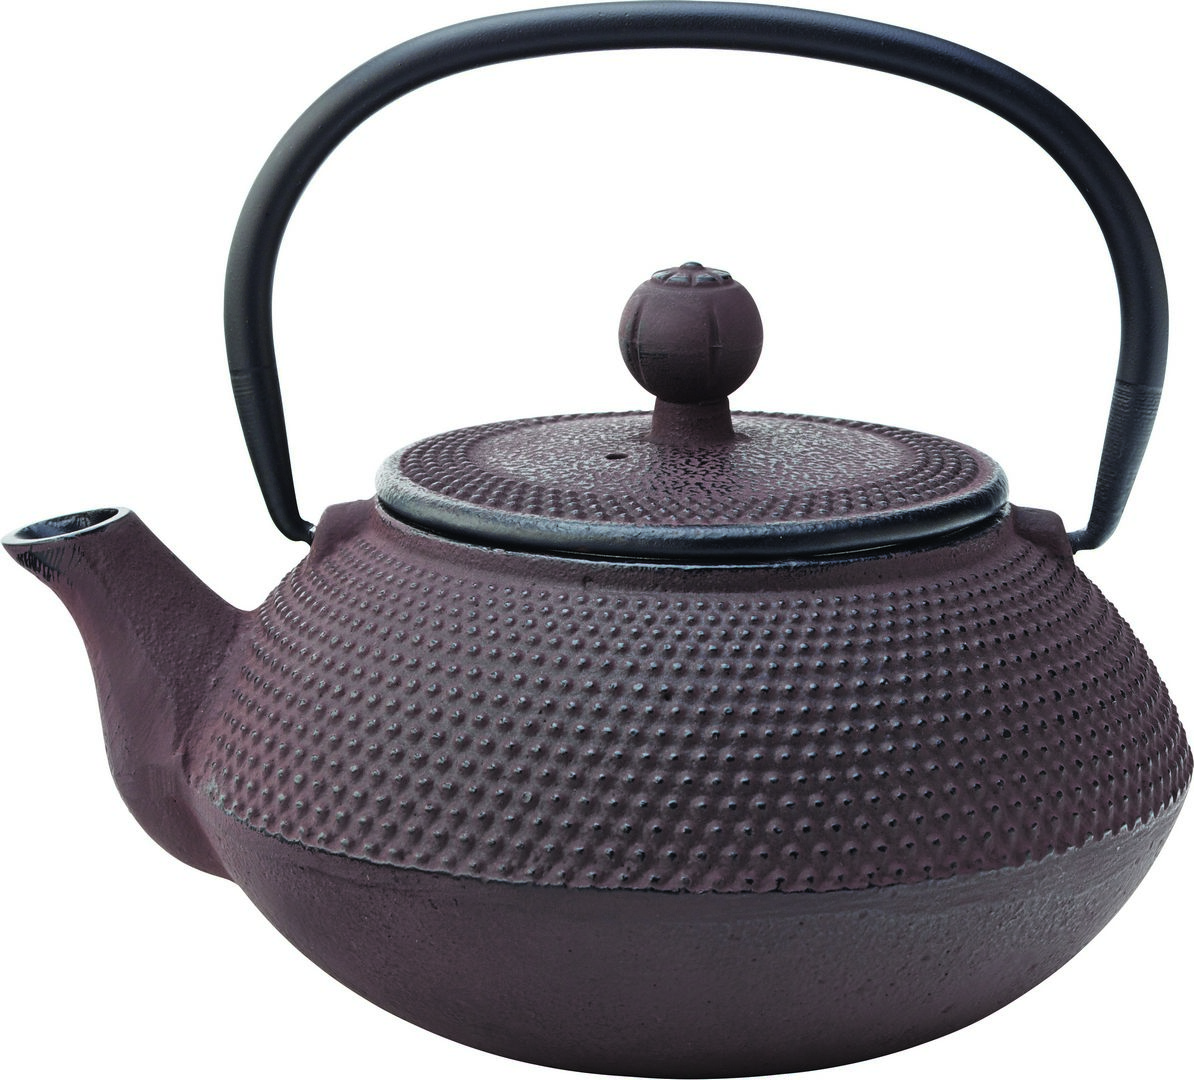 Mandarin Teapot Rustic 24oz (67cl) - with Infuser - MH7008-000000-B01006 (Pack of 6)